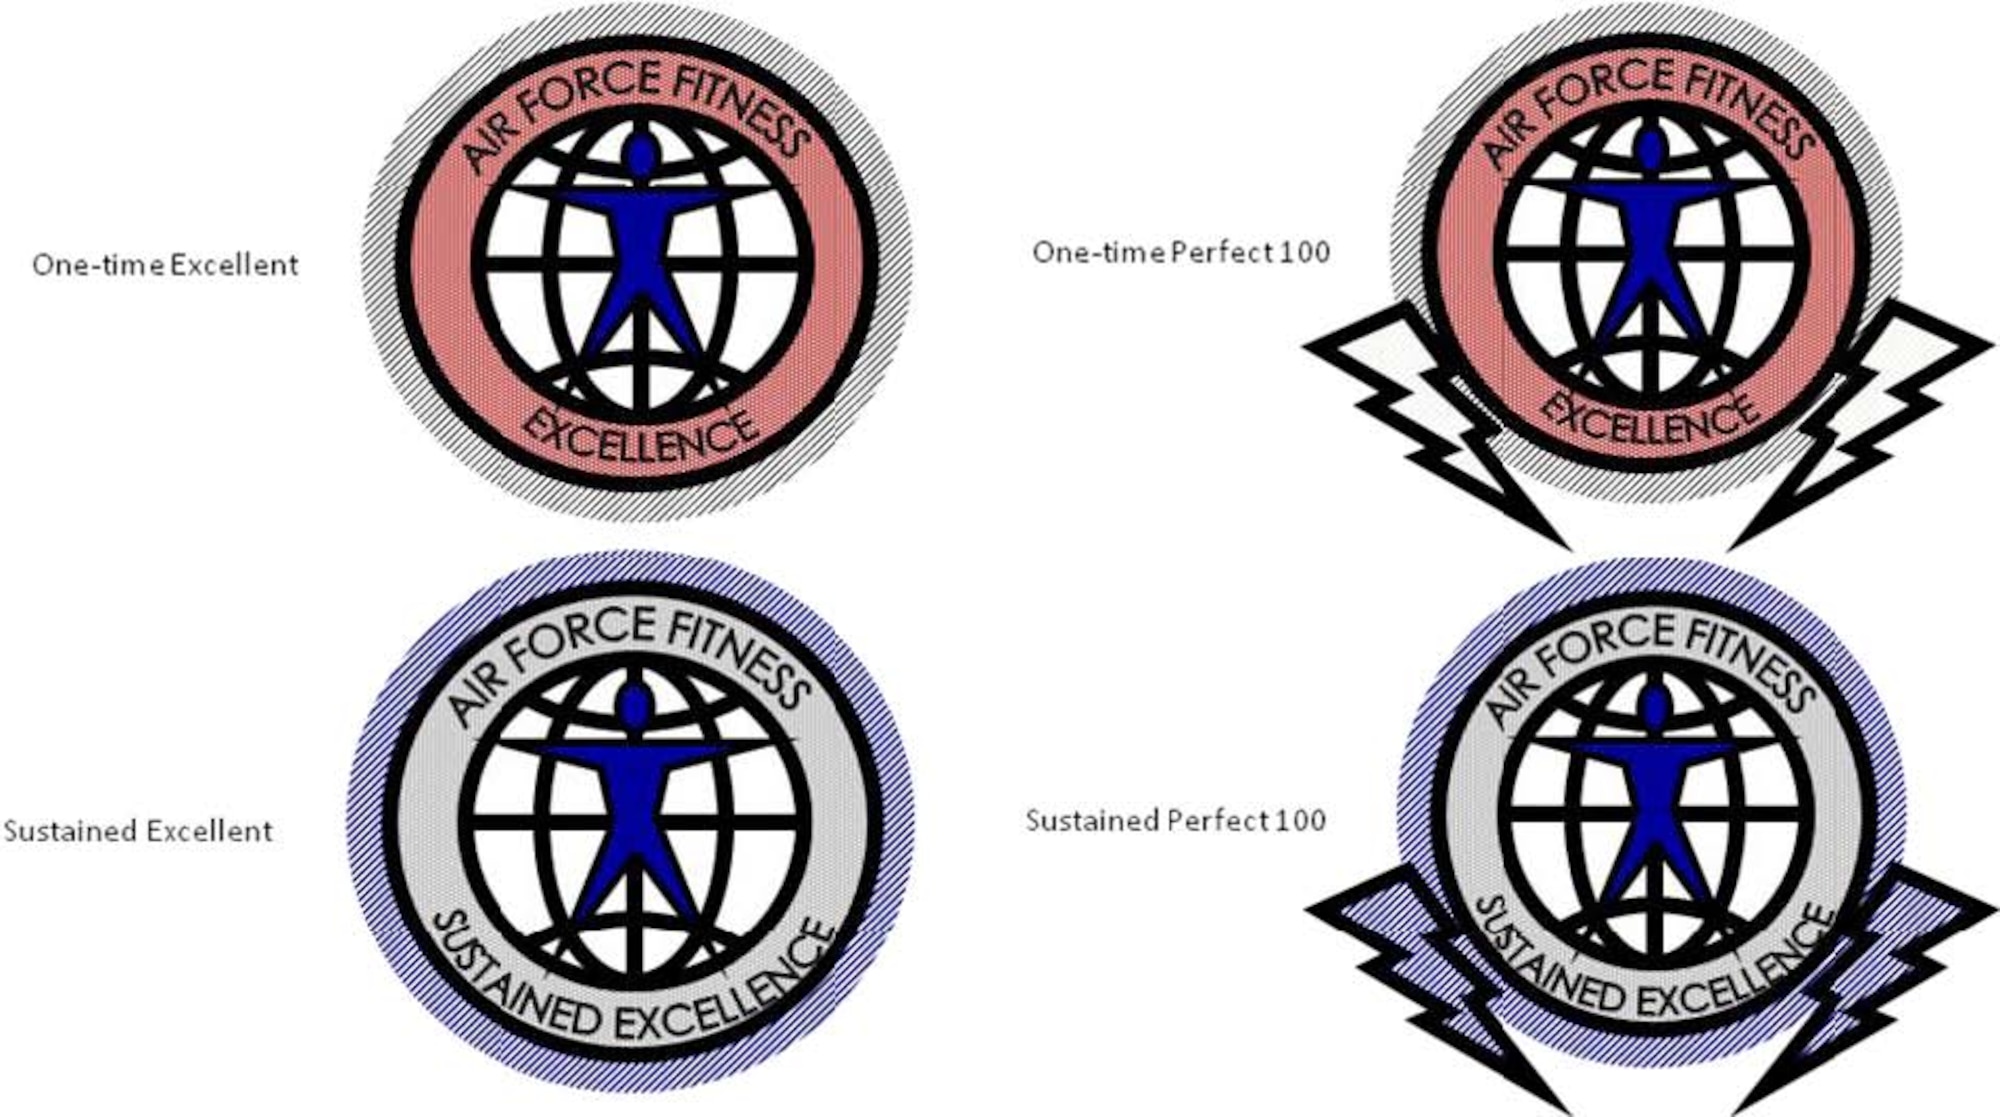 The new physical fitness patches are: excellent, sustained excellent, one-time perfect 100 and sustained perfect 100, and may be worn on teh right sleeve of the Air Force physical fitness T-shirt, long-sleeve shirt or sweatshirt. Airmen will only be allowed to wear the highest patch earned based on current score.